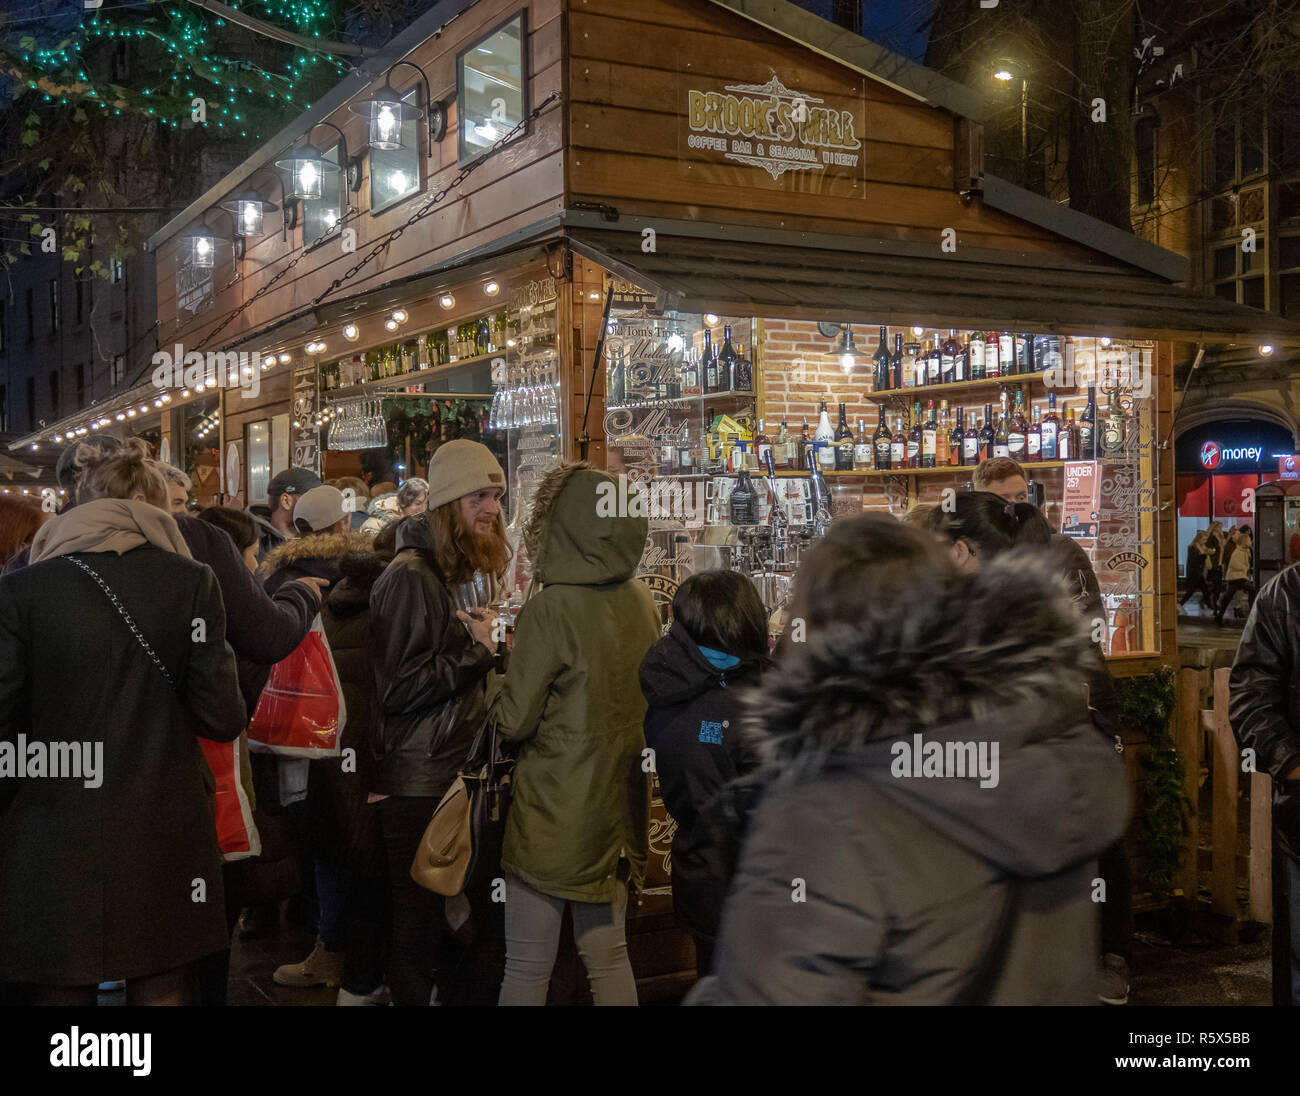 02 December 2018, Manchester Christmas Market.  Brooke's Mill Coffee Bar & Seasonal Winery in Albert Square. Customers enjoy a festive drink at the en Stock Photo